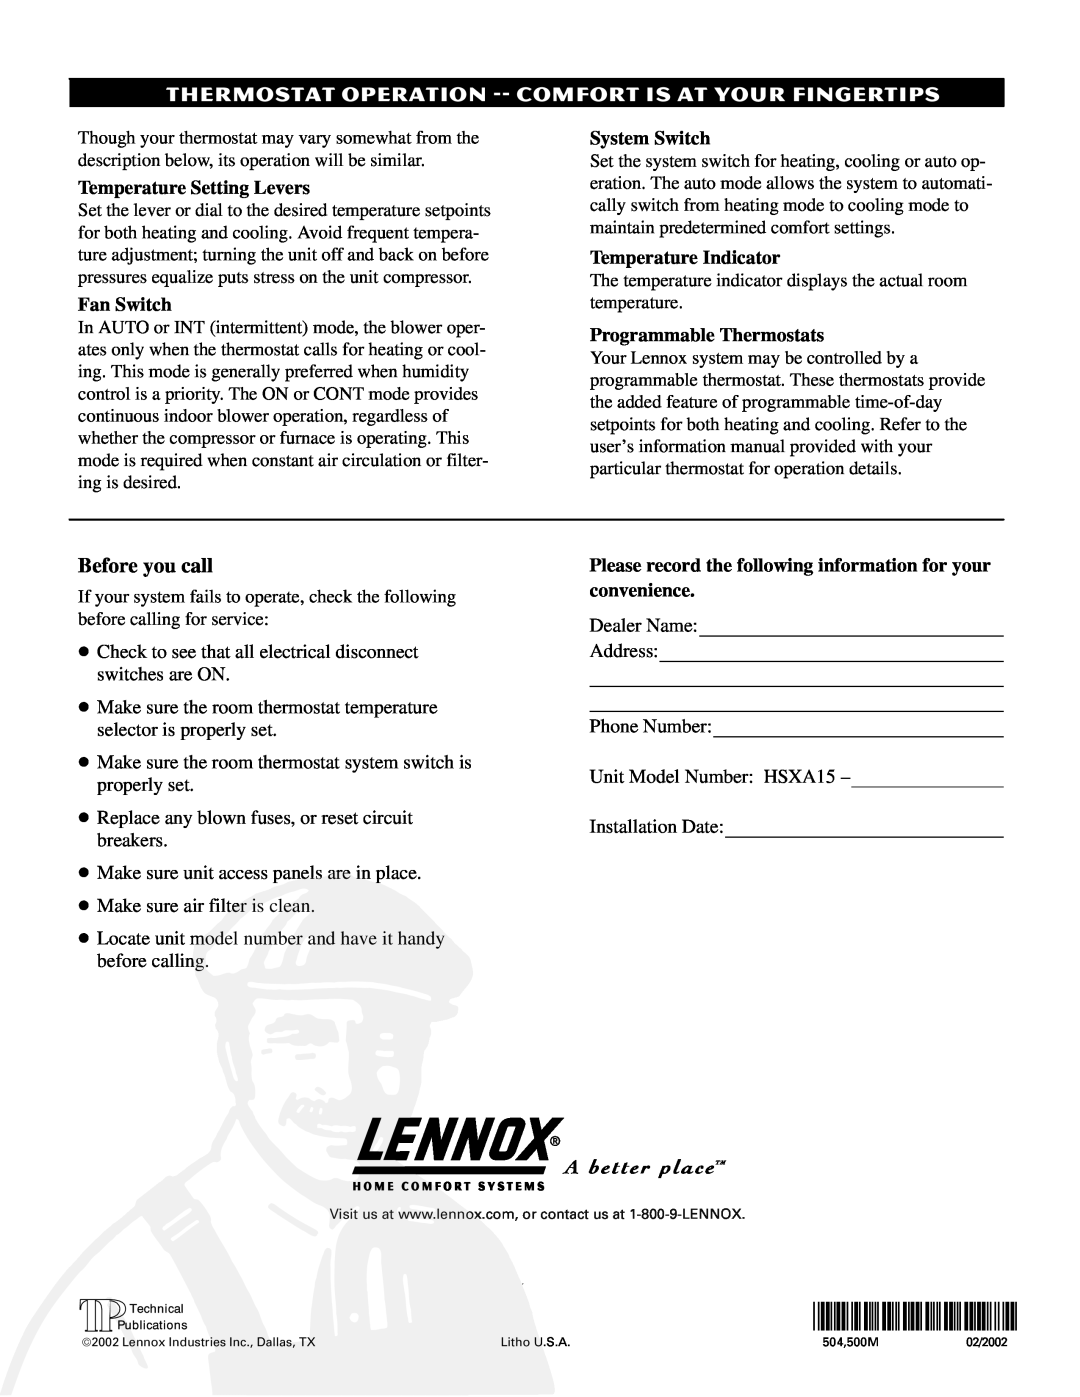 Lennox International Inc HSXA15 Before you call, Temperature Setting Levers, Fan Switch, System Switch, P504500M 